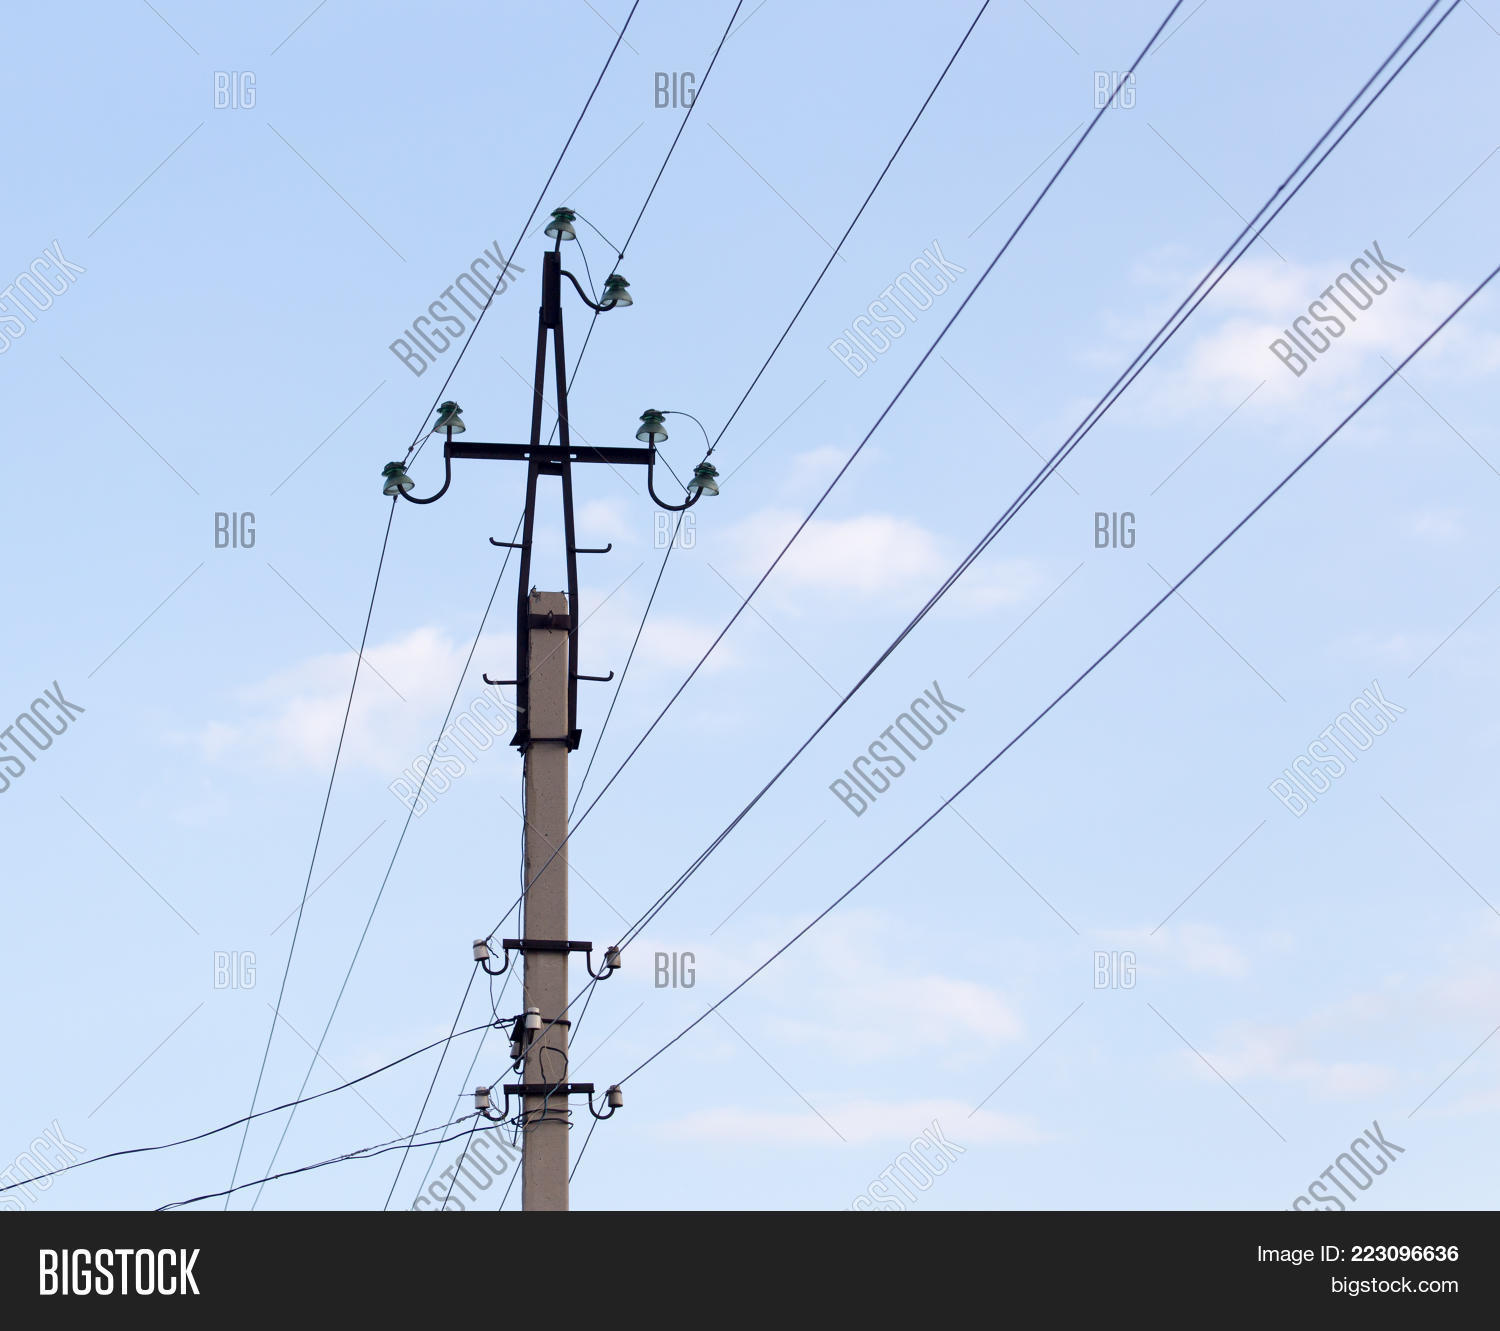 Mast Electrical Power Line Against Image & Photo | Bigstock